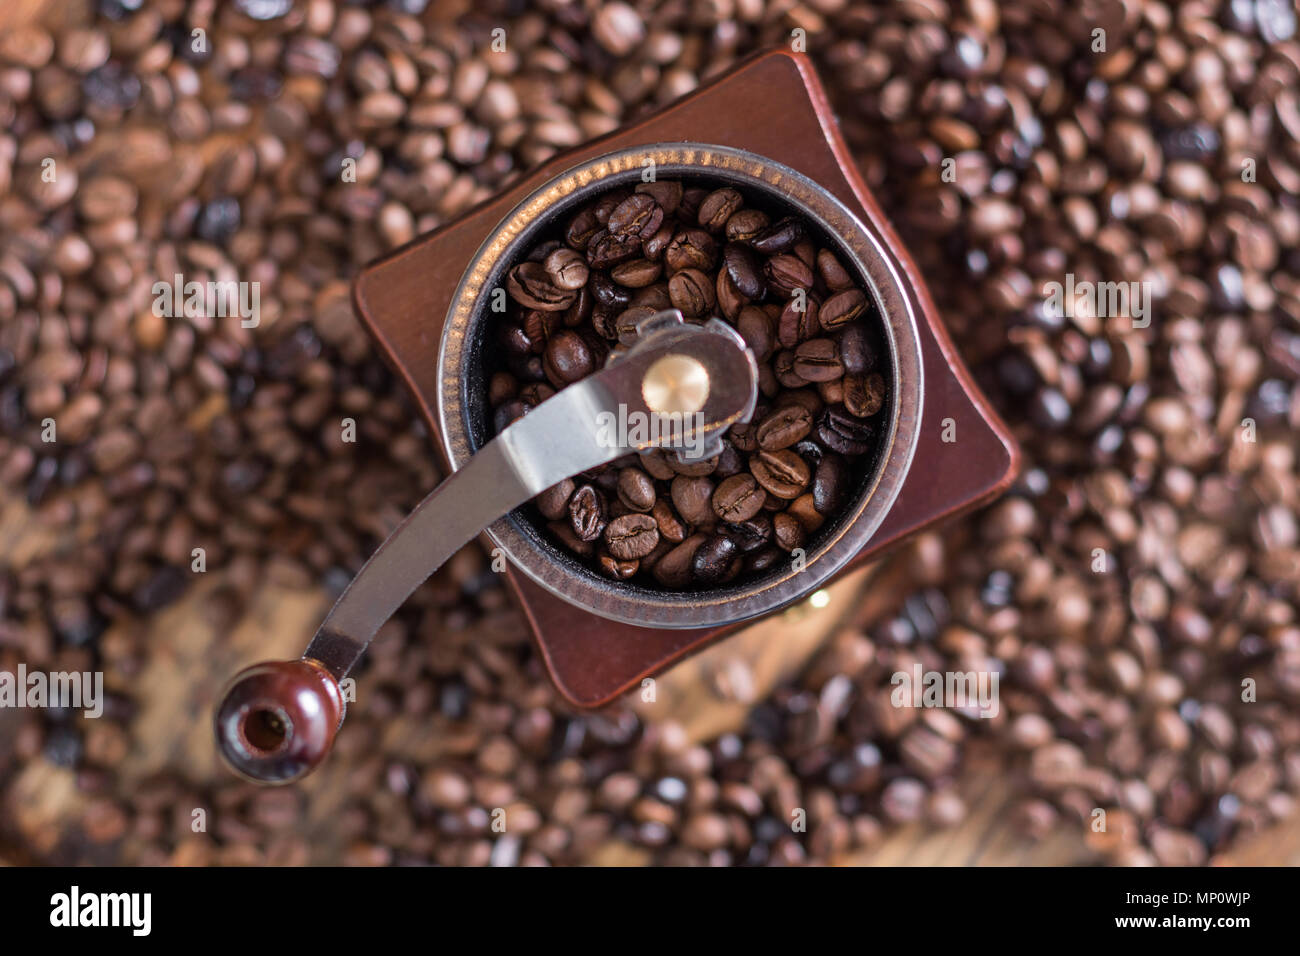 https://c8.alamy.com/comp/MP0WJP/coffee-grinder-and-roasted-coffee-beans-in-background-top-view-selective-focus-MP0WJP.jpg